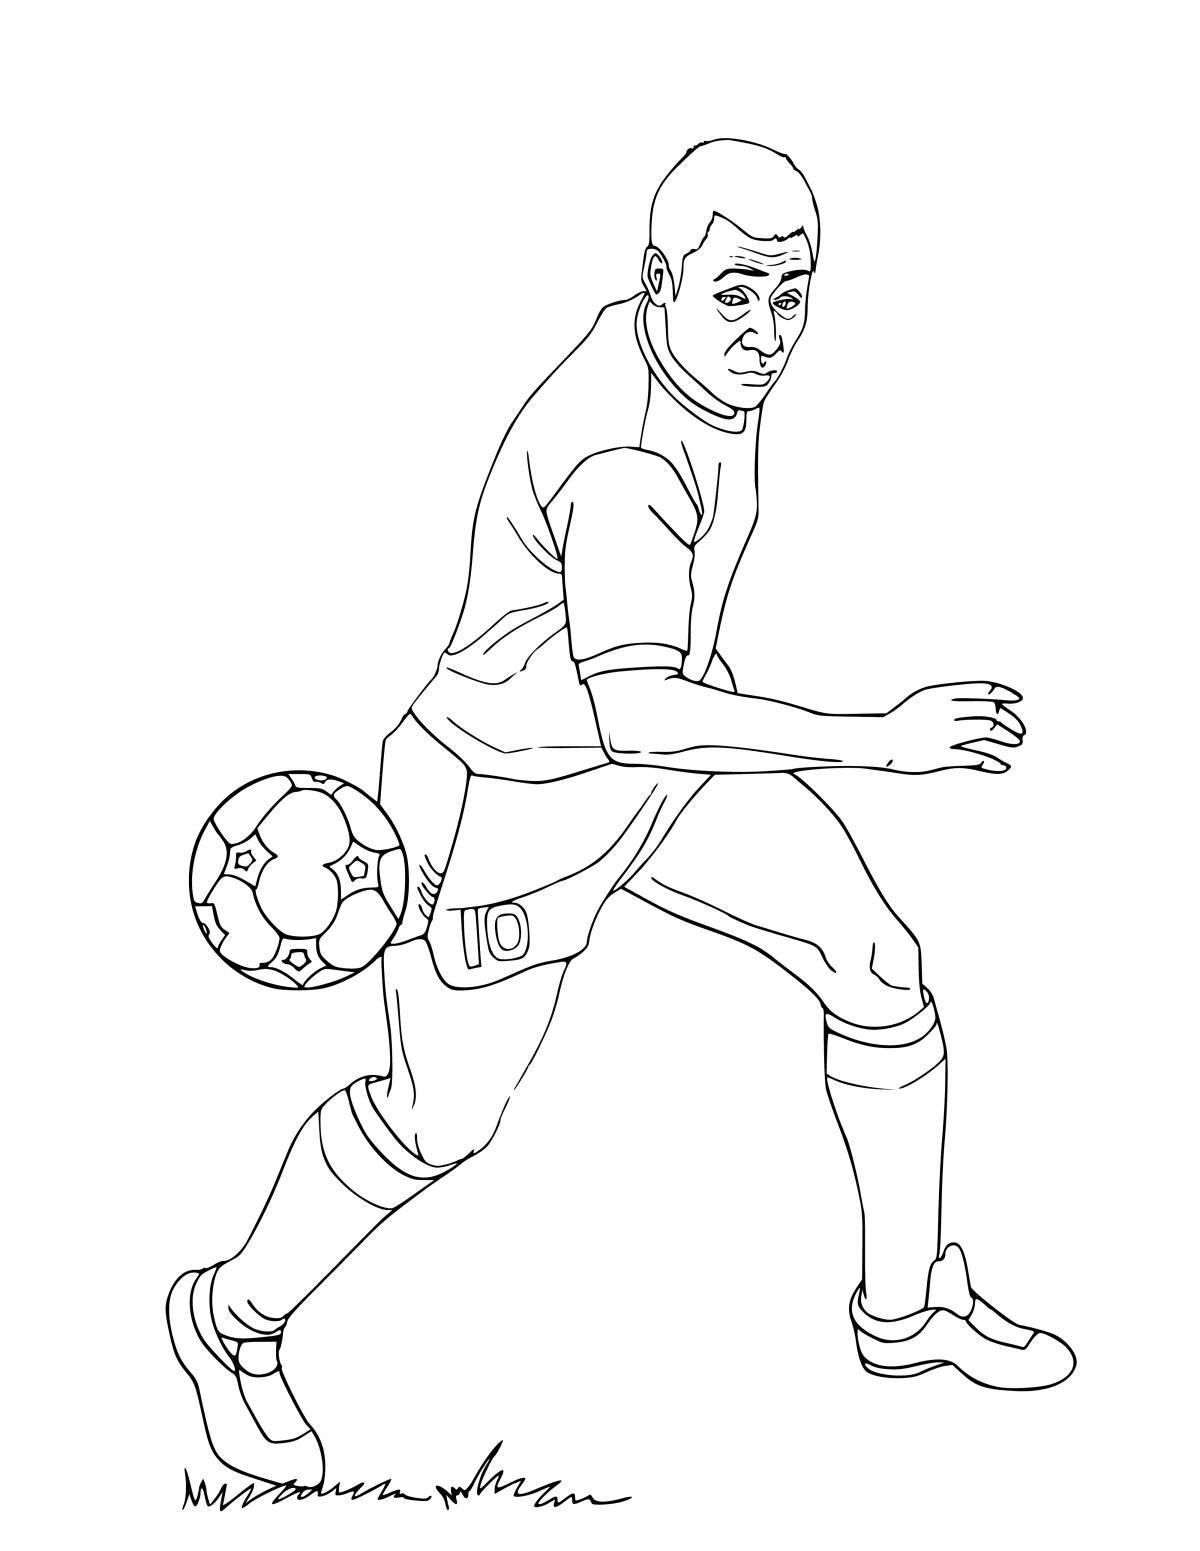 Colorful soccer player coloring page